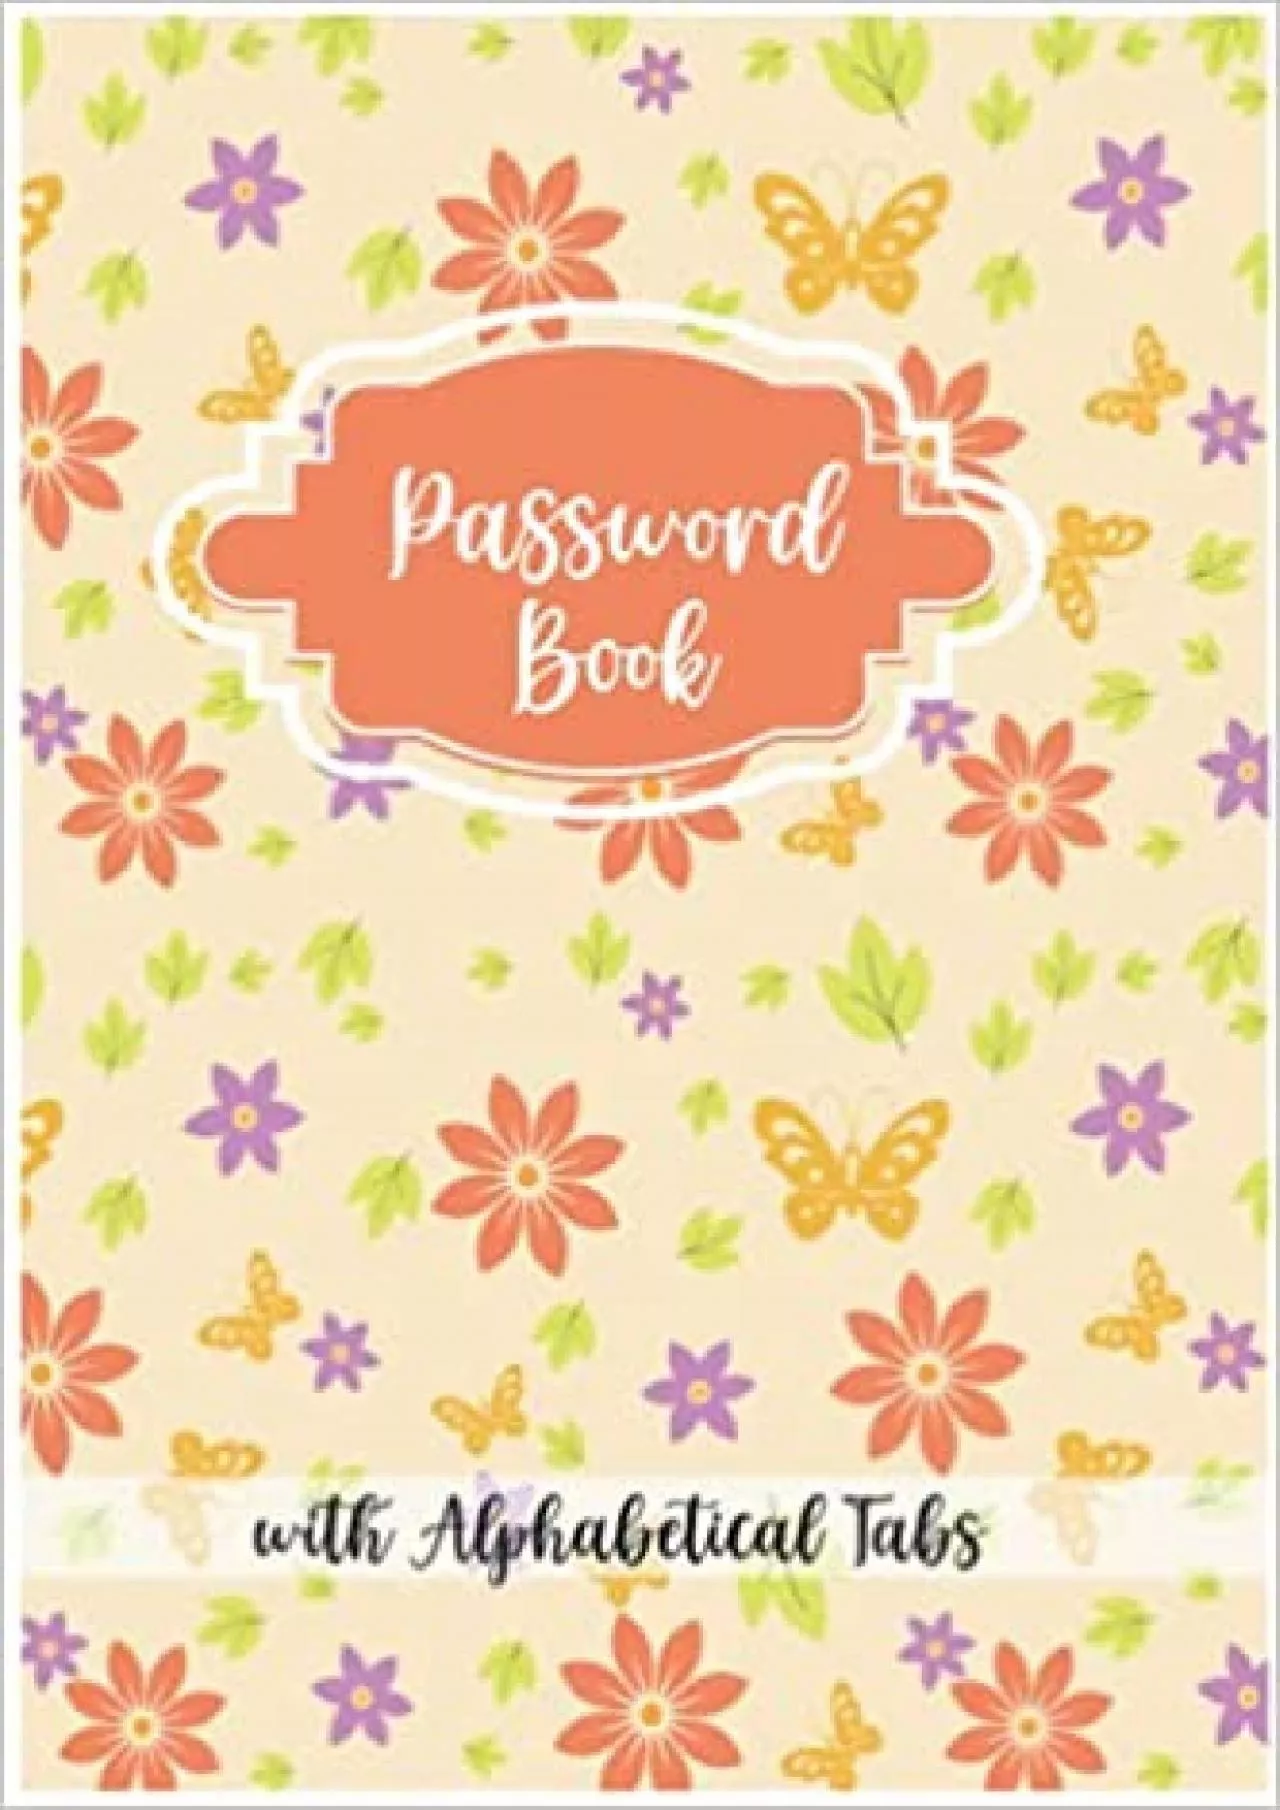 (DOWNLOAD)-Password Book With Alphabetical Tabs: Password Keeper With Alphabetical Tabs:Personal